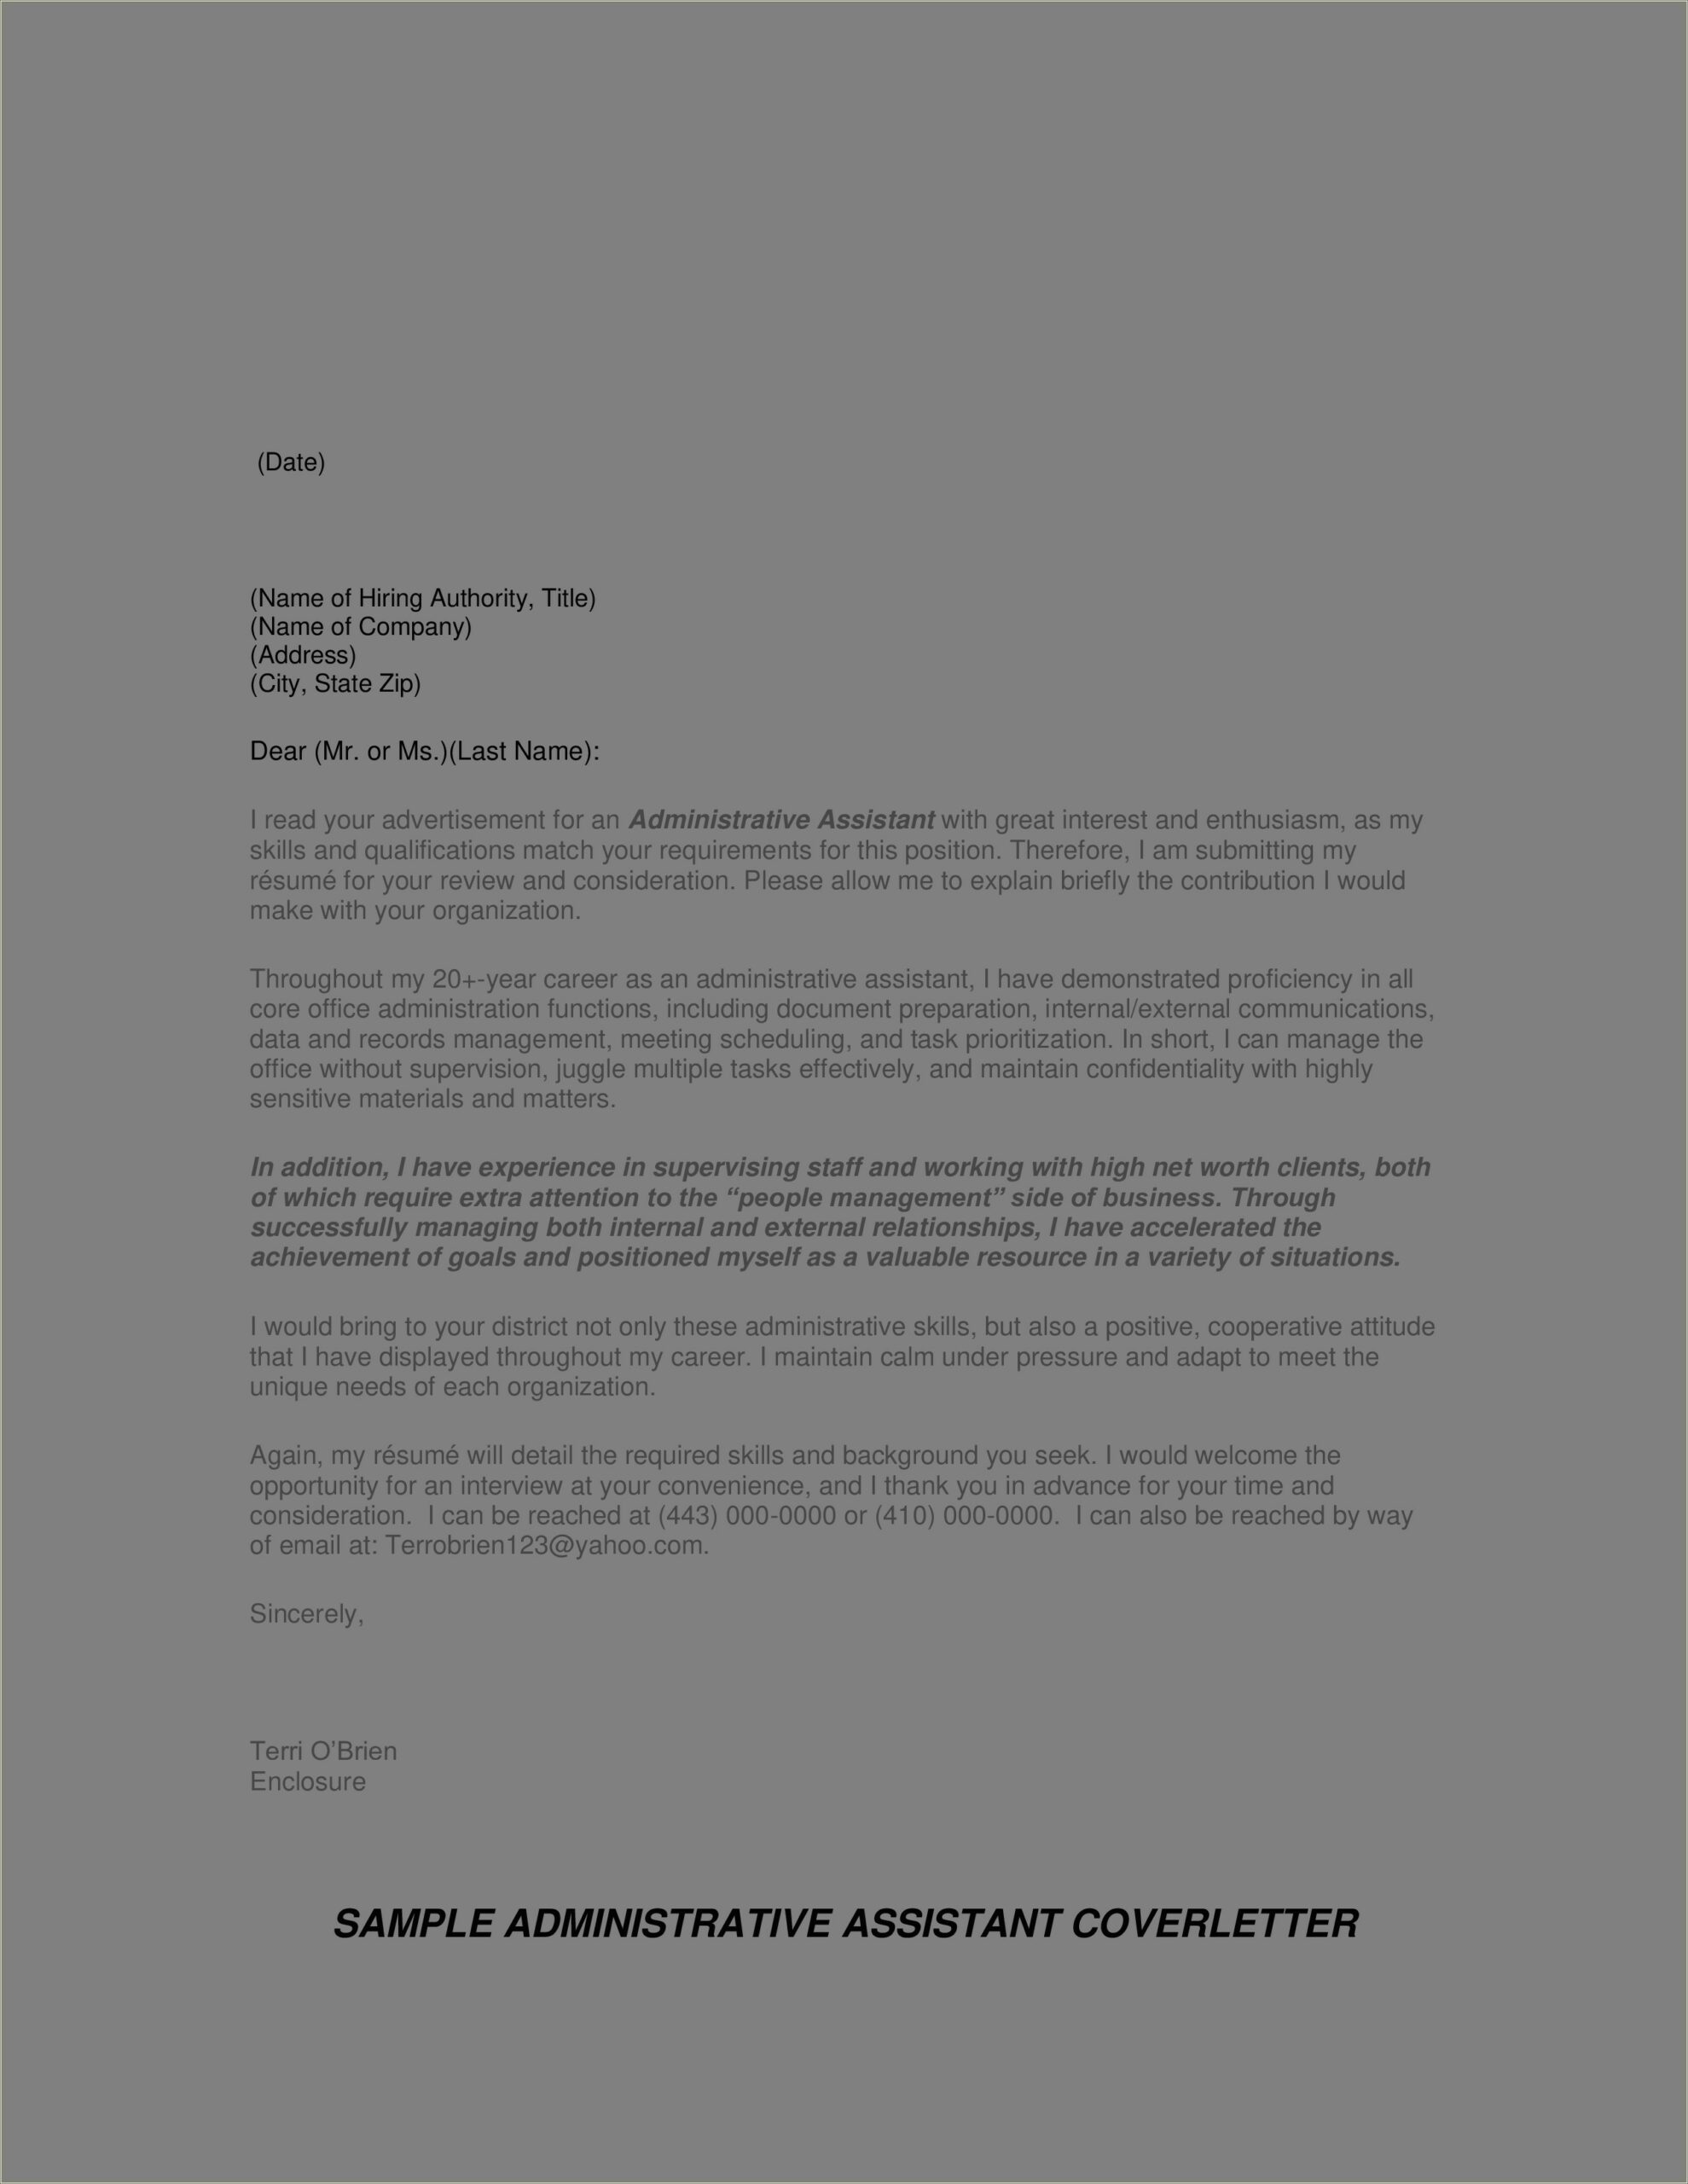 Administrative Assistant Job Resume Cover Letter